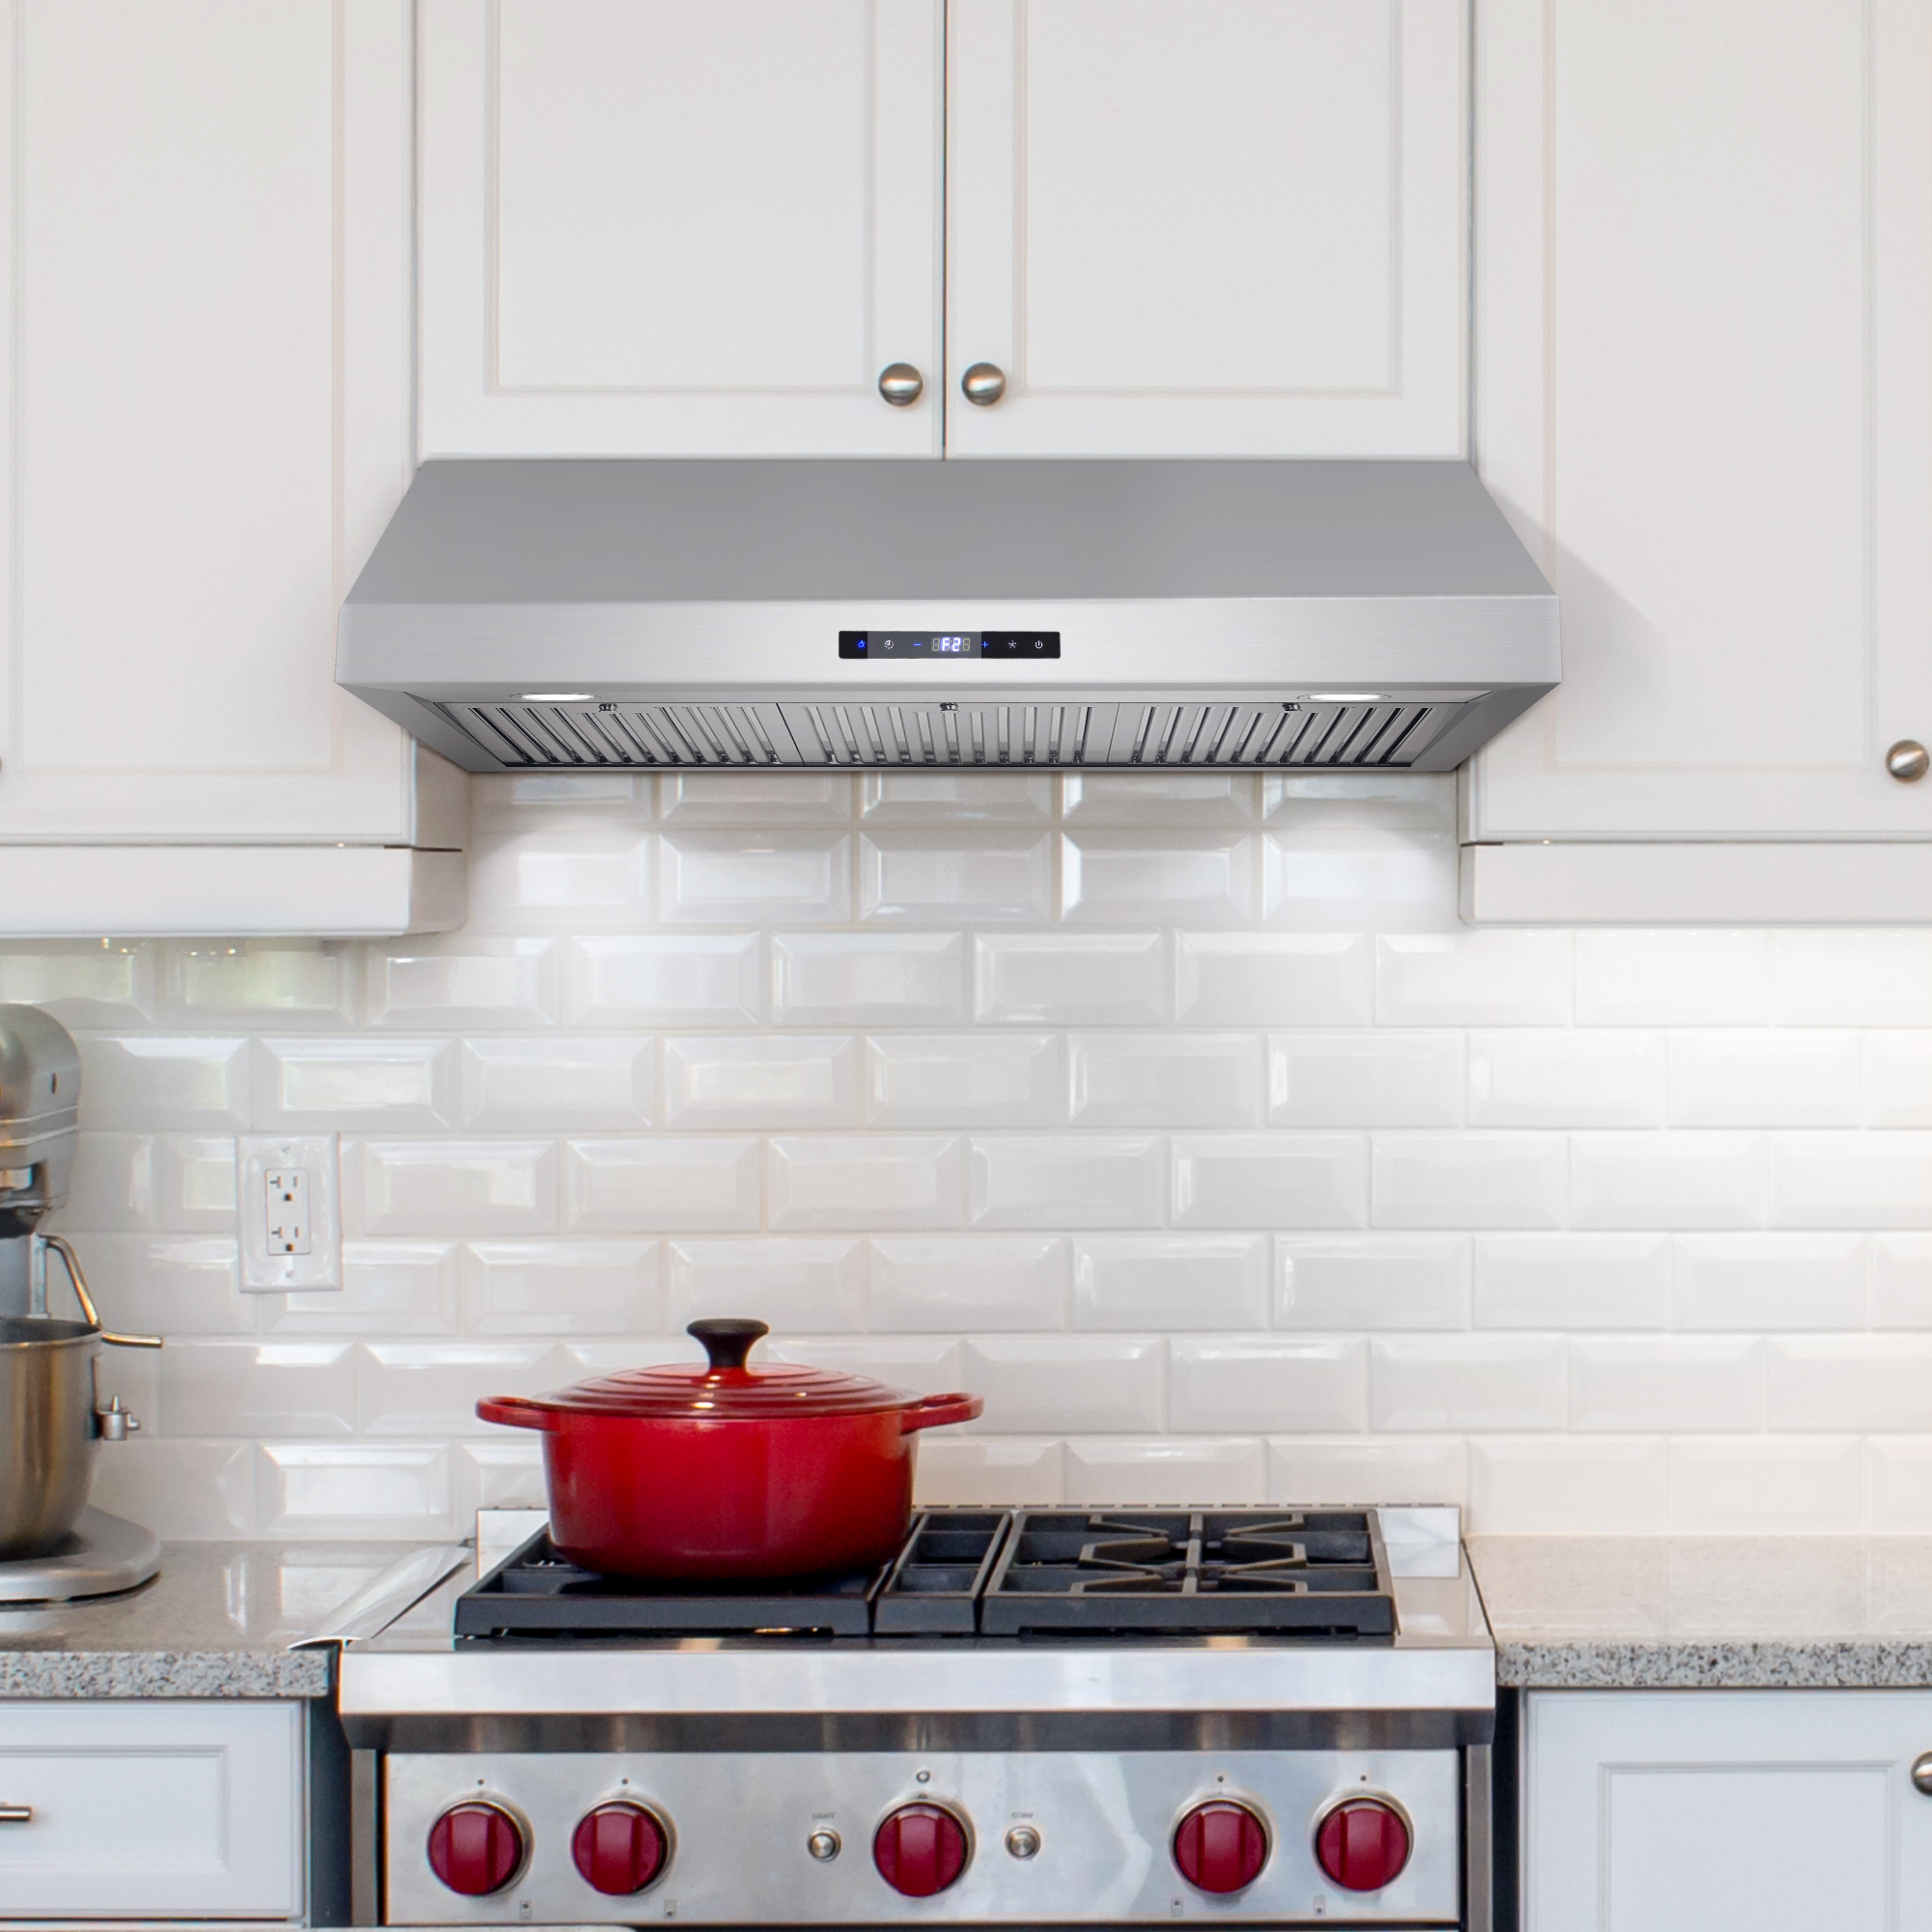 How to Clean Your Range Hood and Filters